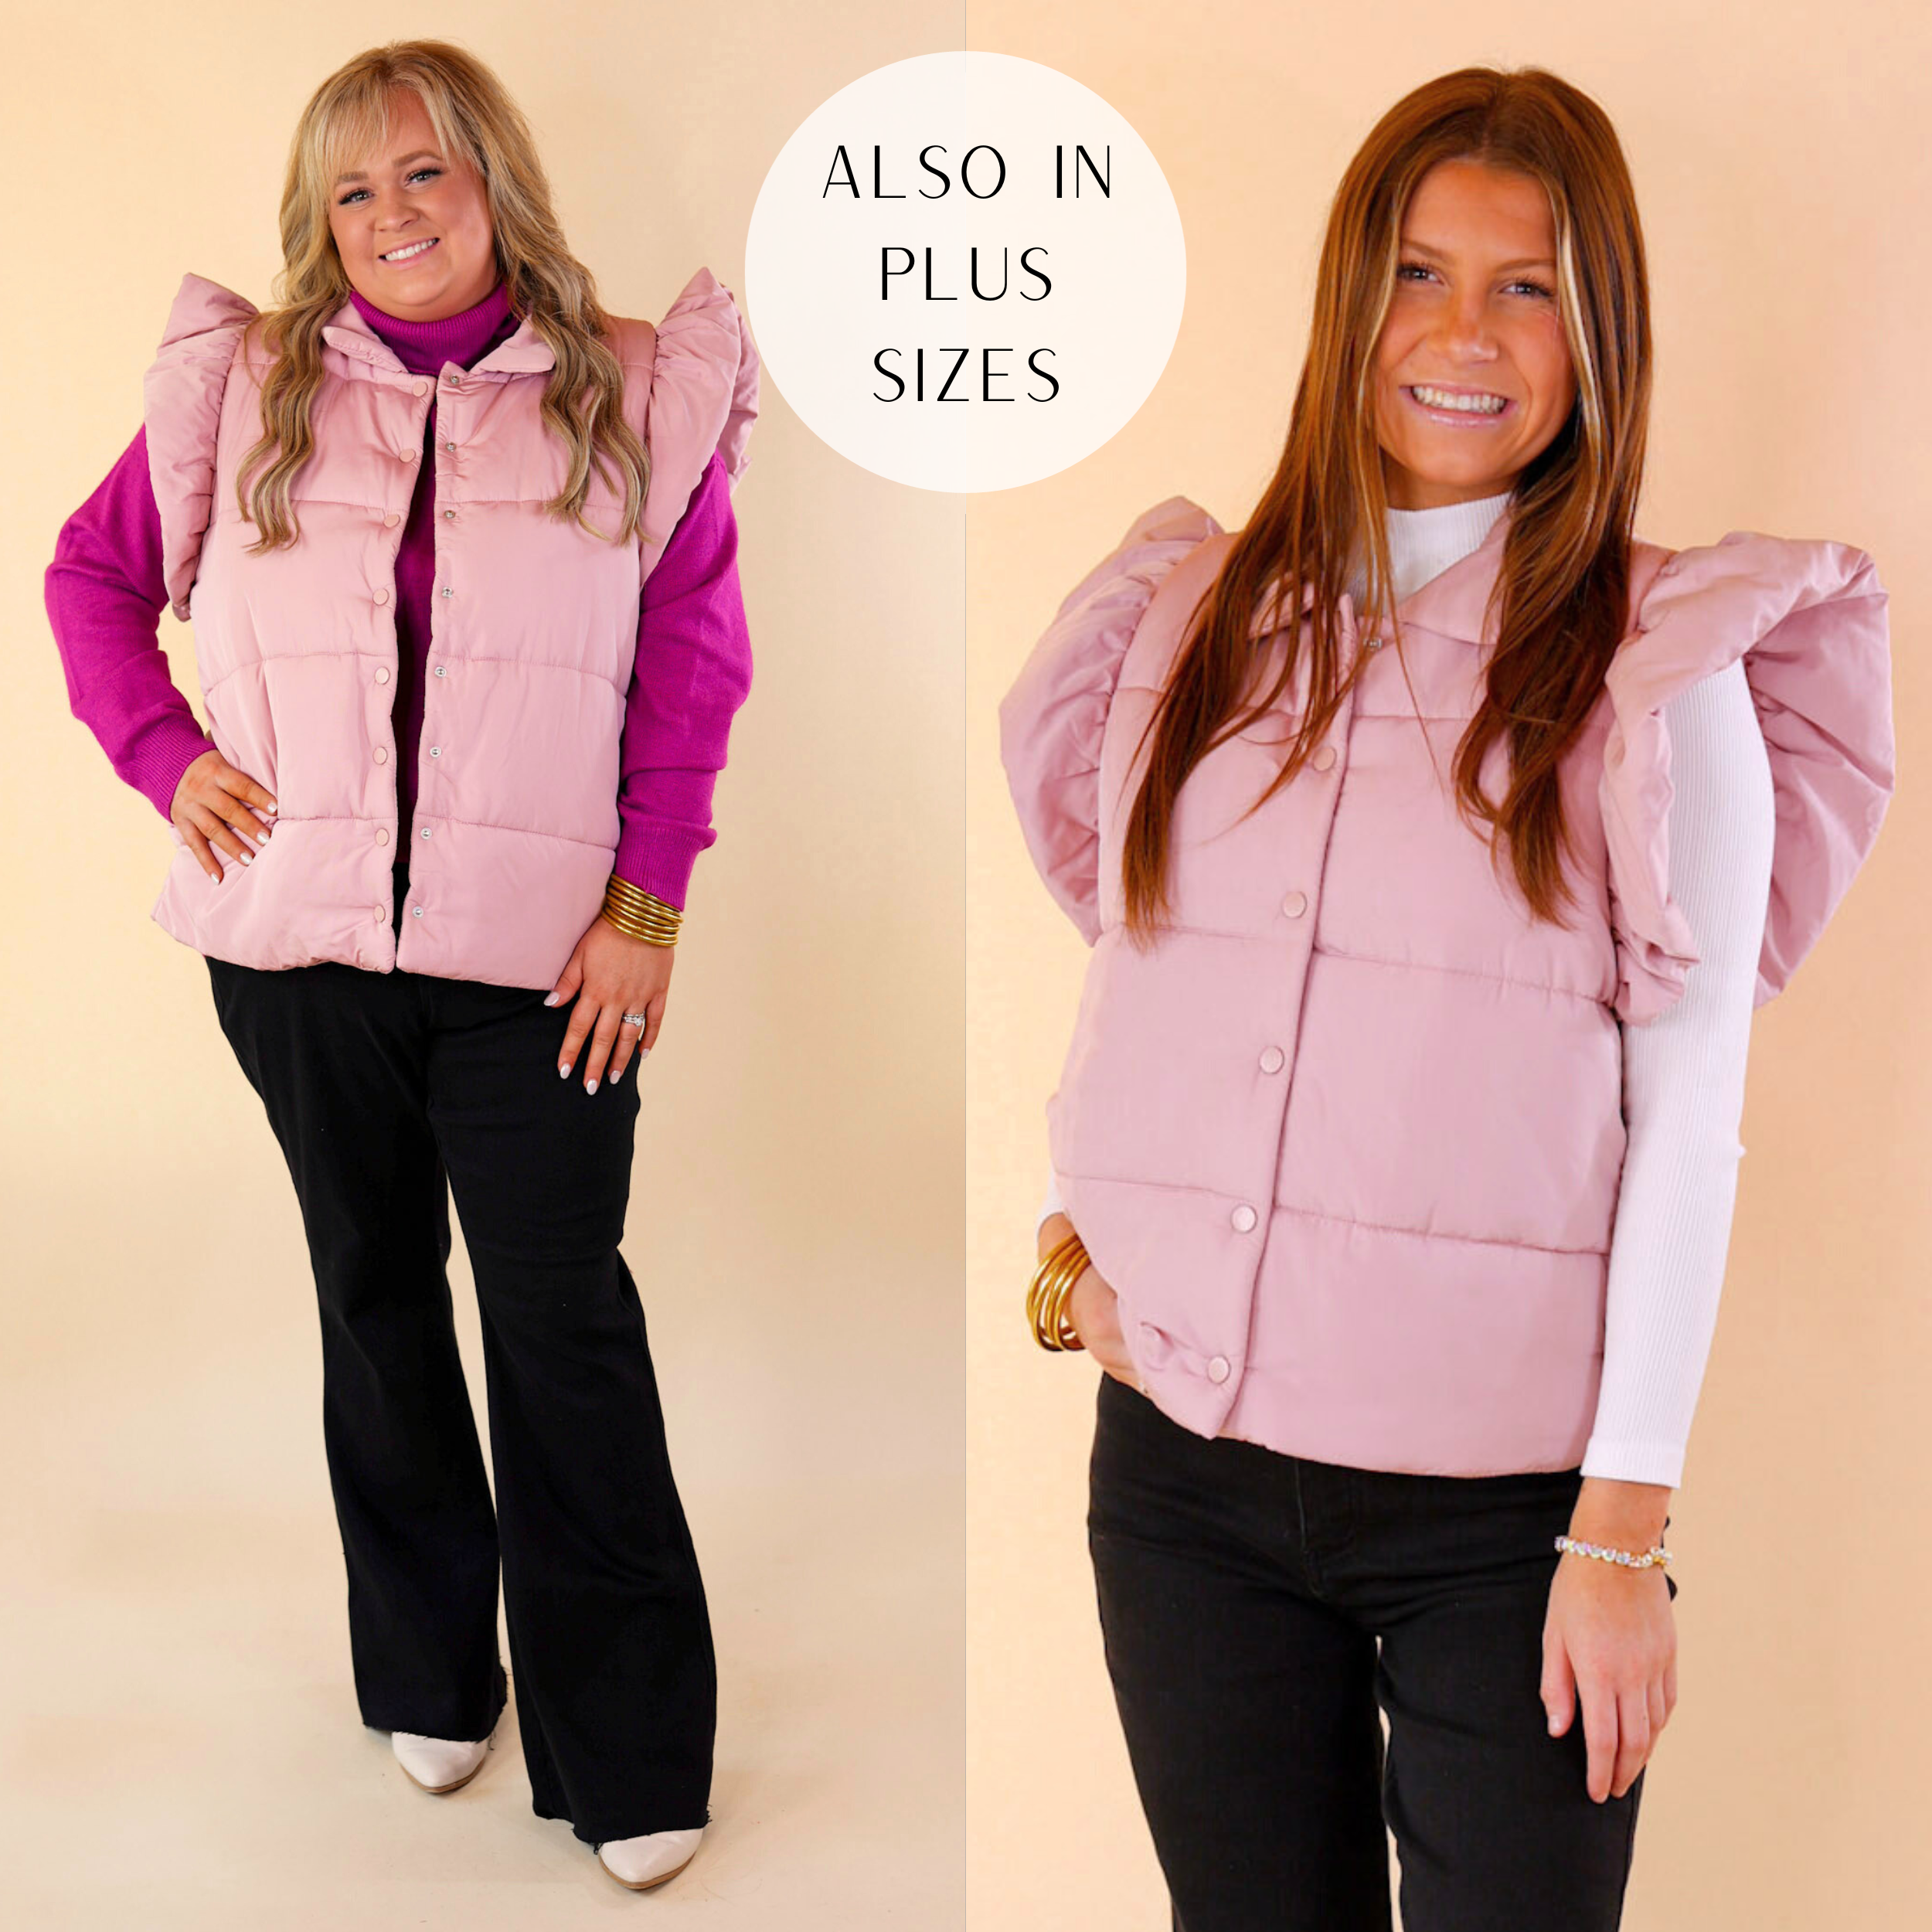 Models are wearing blush pink zip up puffer vest. Plus size model has it paired with black bootcut jeans, pink turtleneck, and white booties. Size small has it paired with black jeans, white shirt, black booties and gold jewelry.